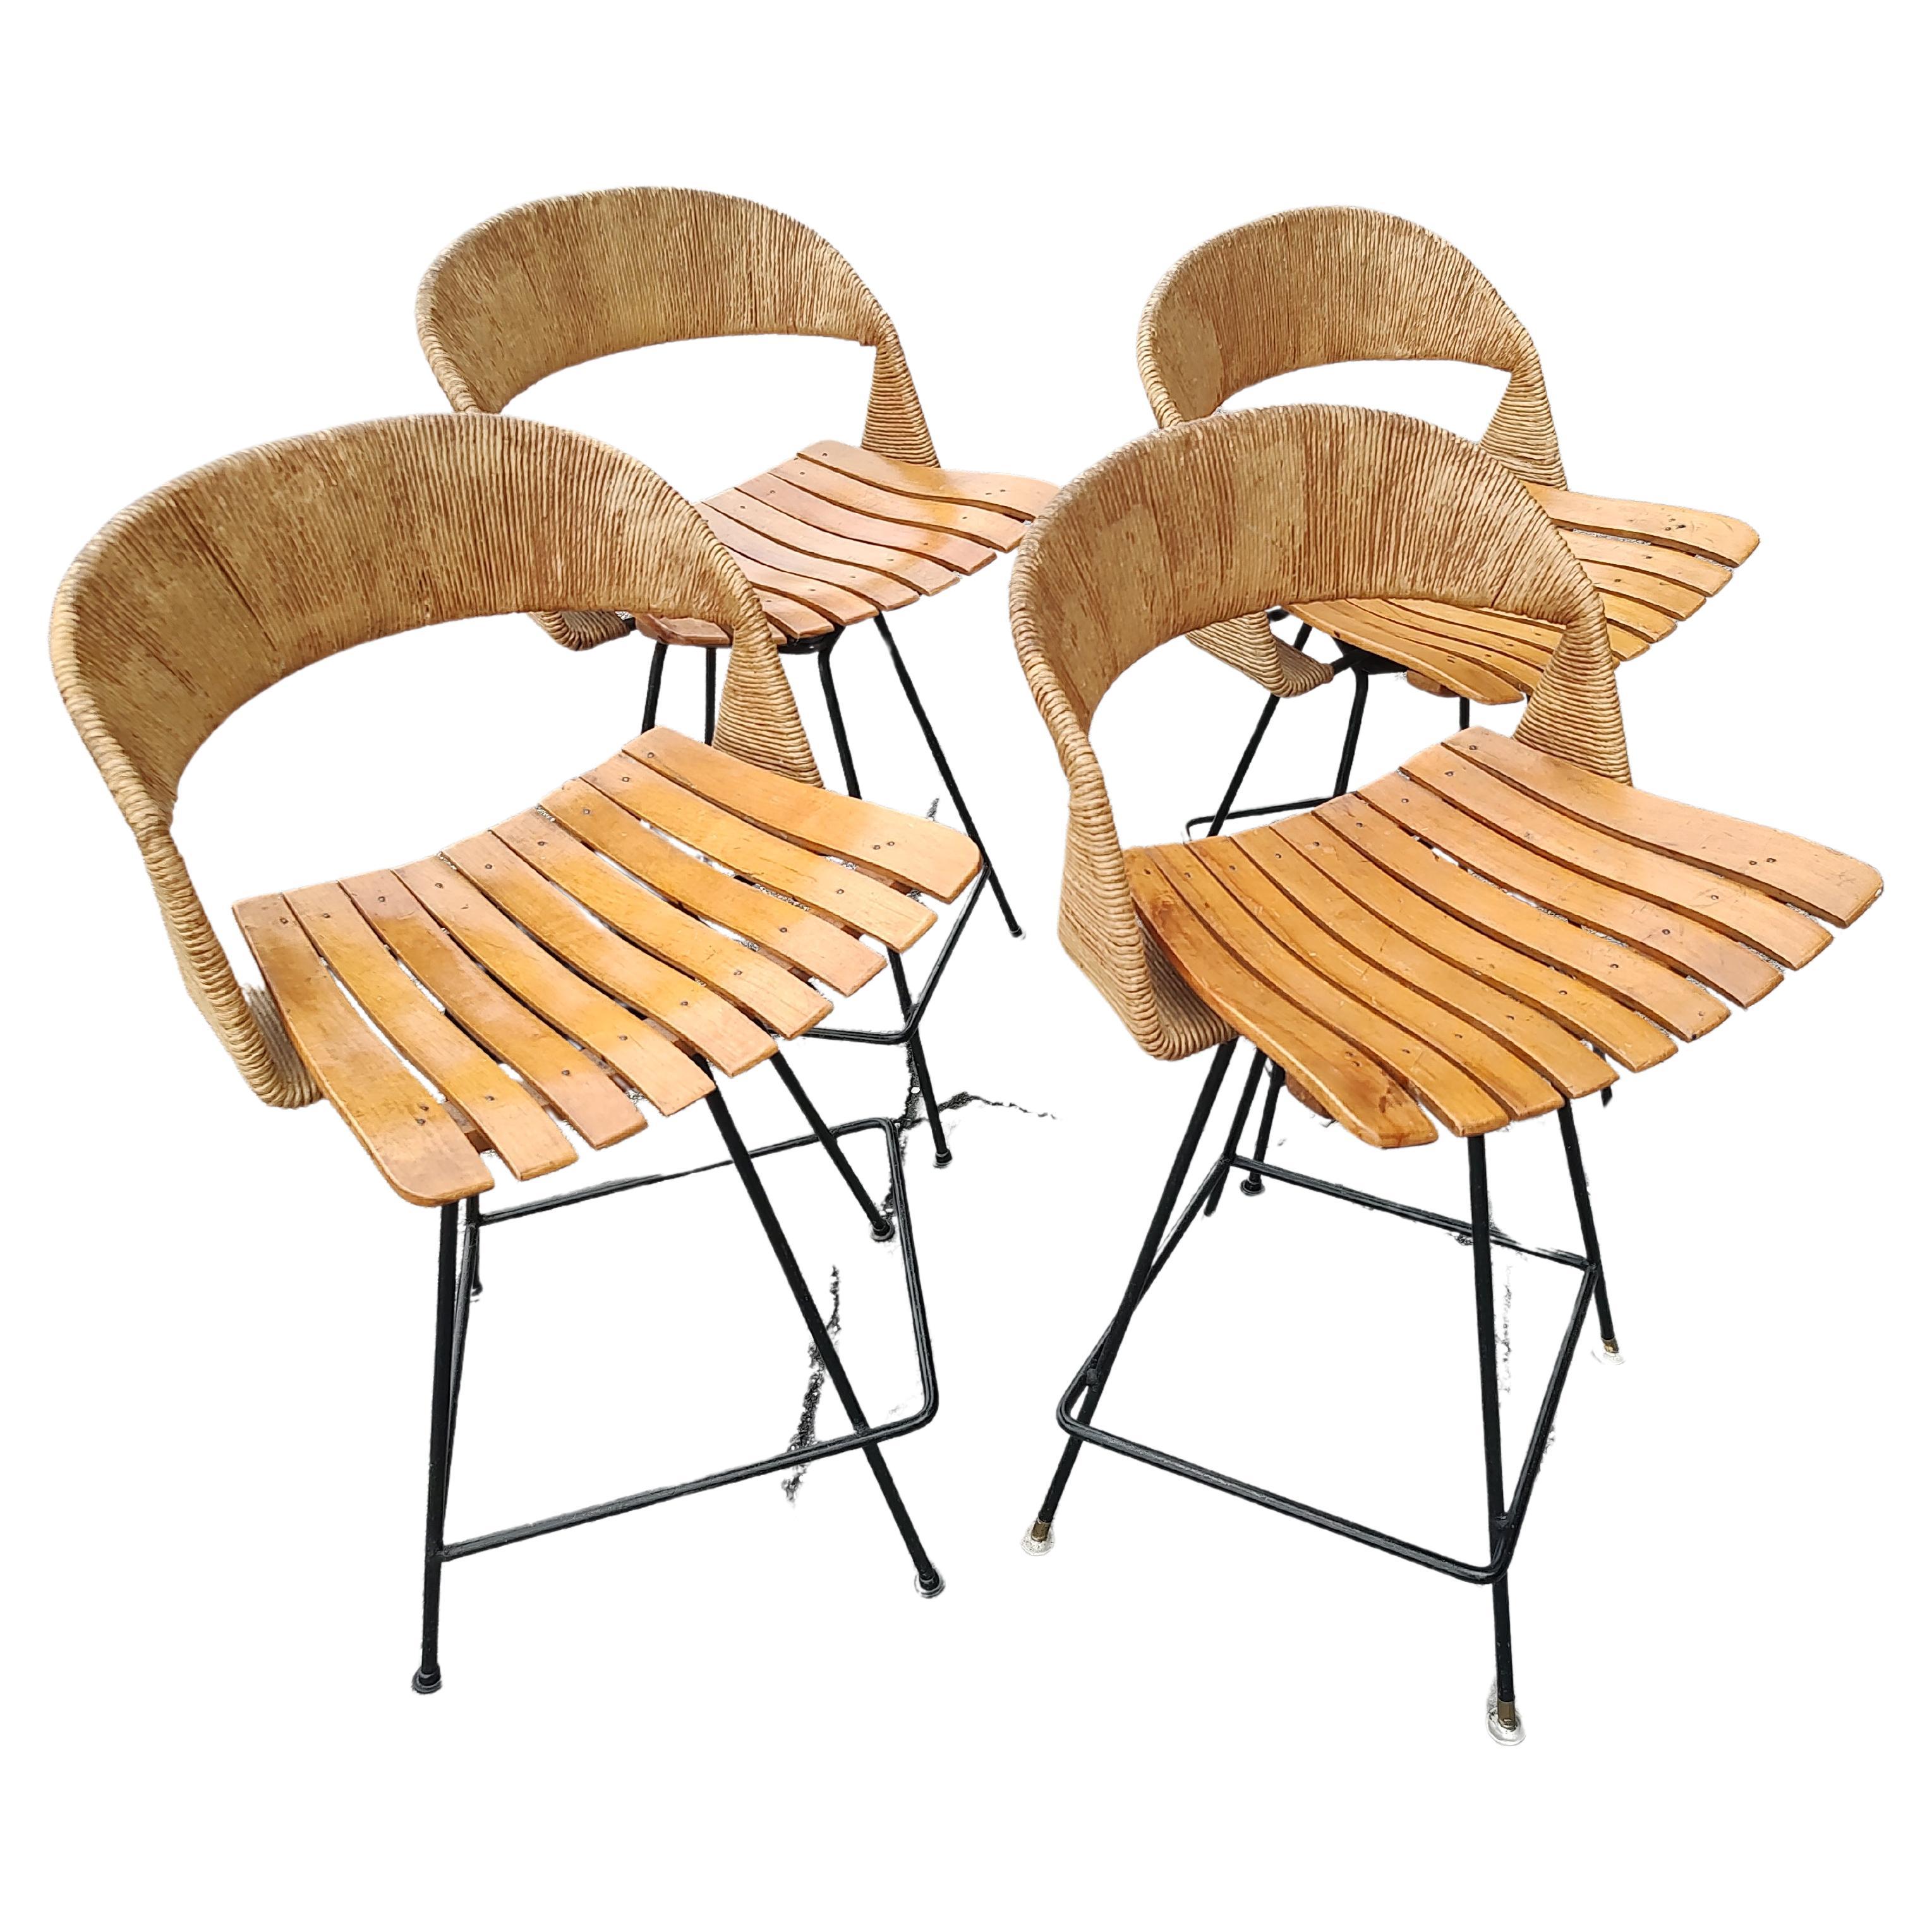 Fabulous pairs of bar/ counter stools by Arthur Umanoff for the Boyeur Scott furniture Co. C1960. Sold as pairs for you're convenience as you can buy all 4 also. 
Construction is an iron frame with a Swiveling seat of maple and a paper cord, raffia